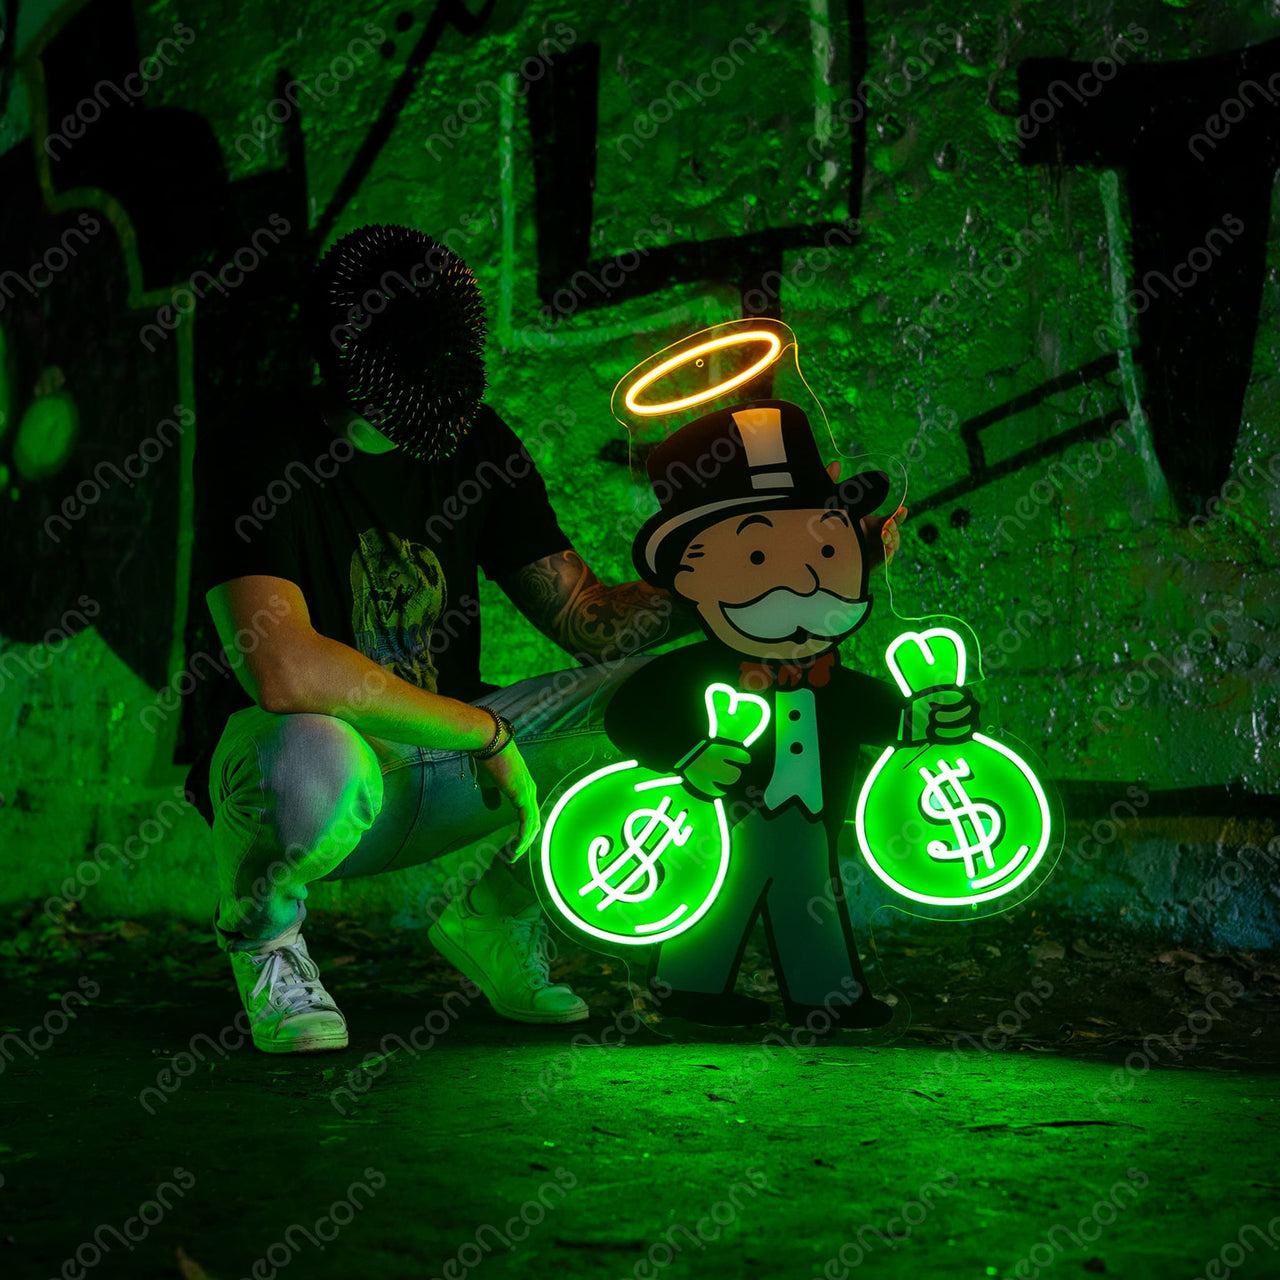 "Advance to Go, Collect $200" LED Neon x Acrylic Artwork by Neon Icons